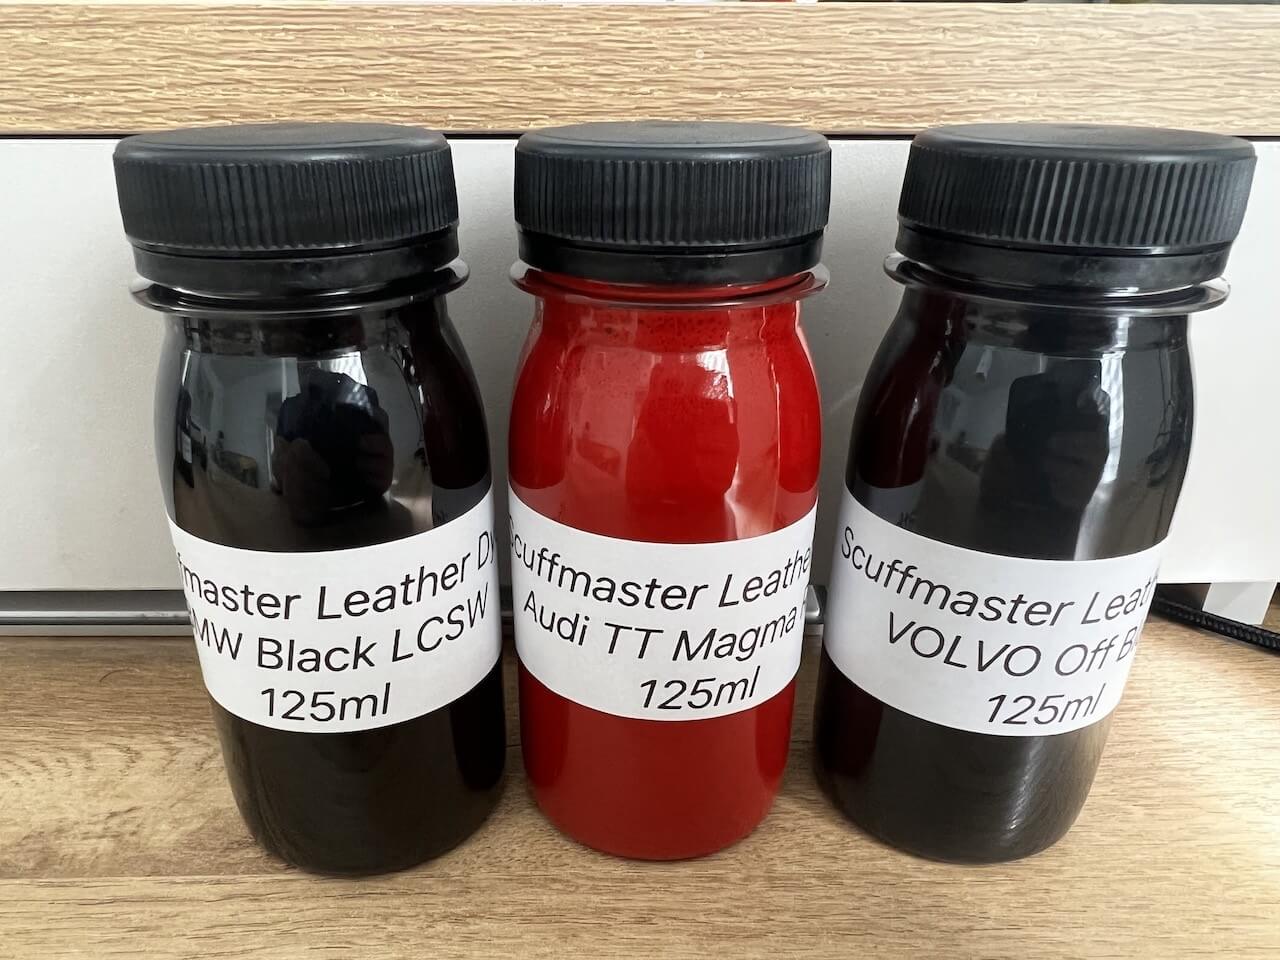 TVR SCUFFMASTER LEATHER DYE 125ml BOTTLE